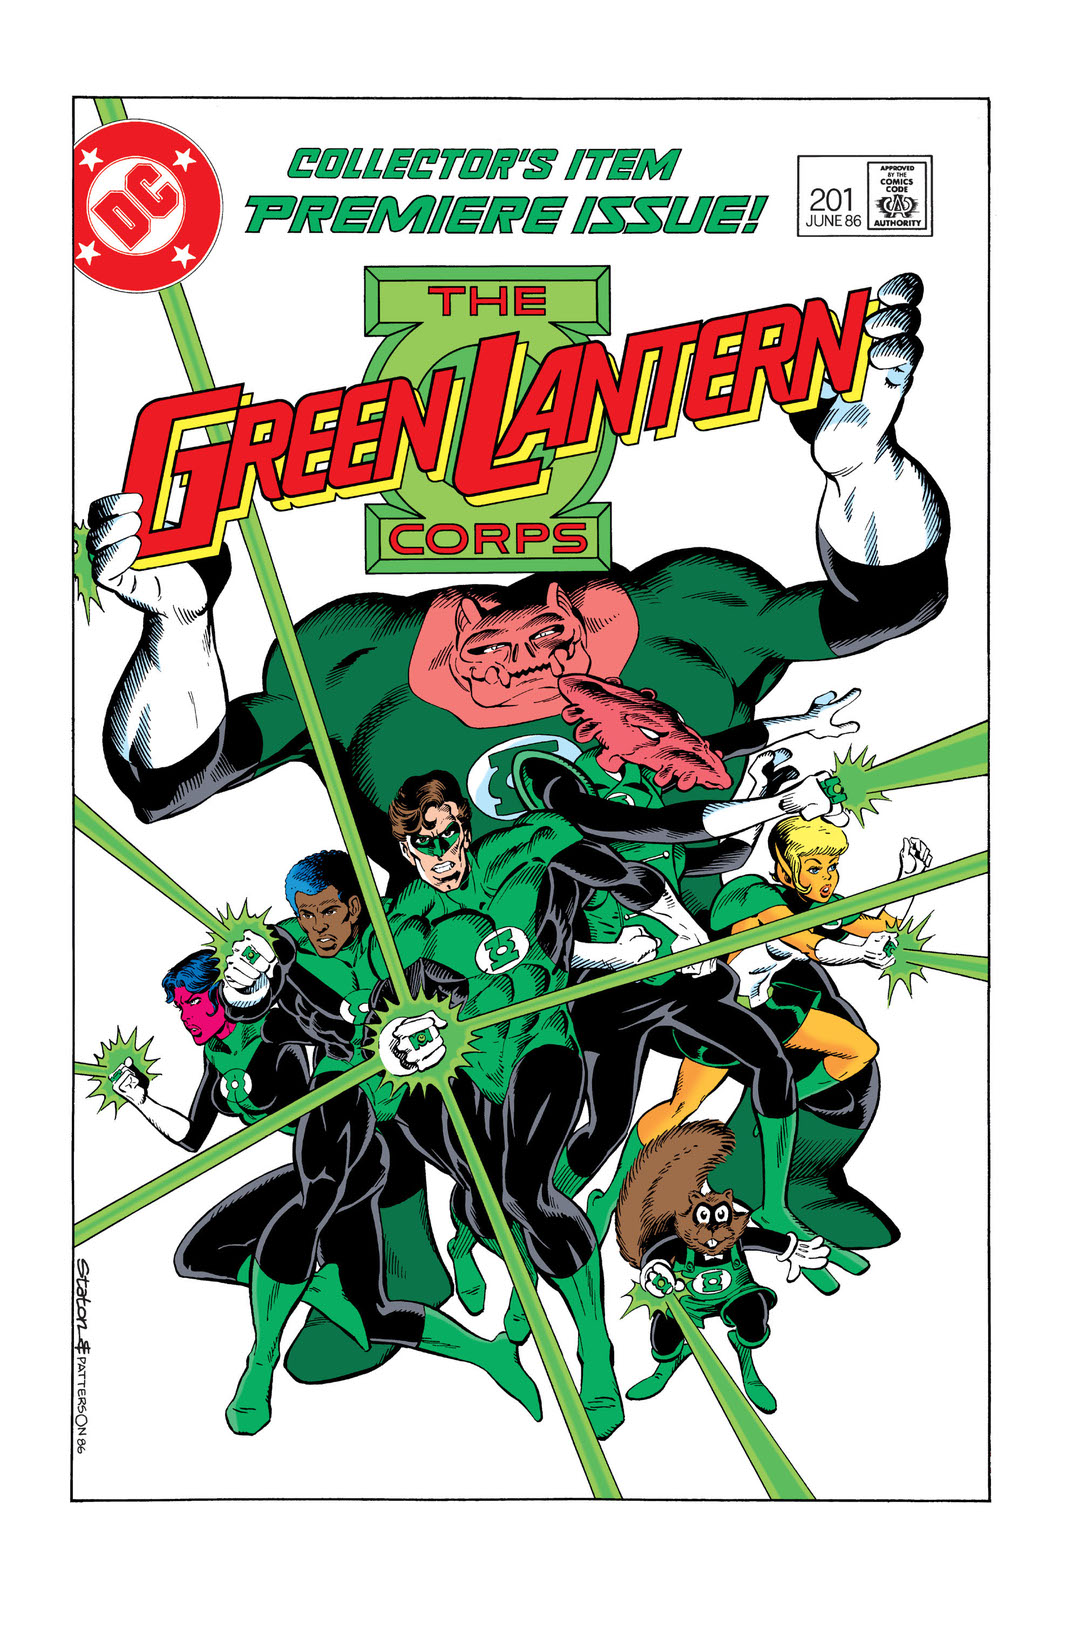 Green Lantern Corps (1986-) #201 preview images